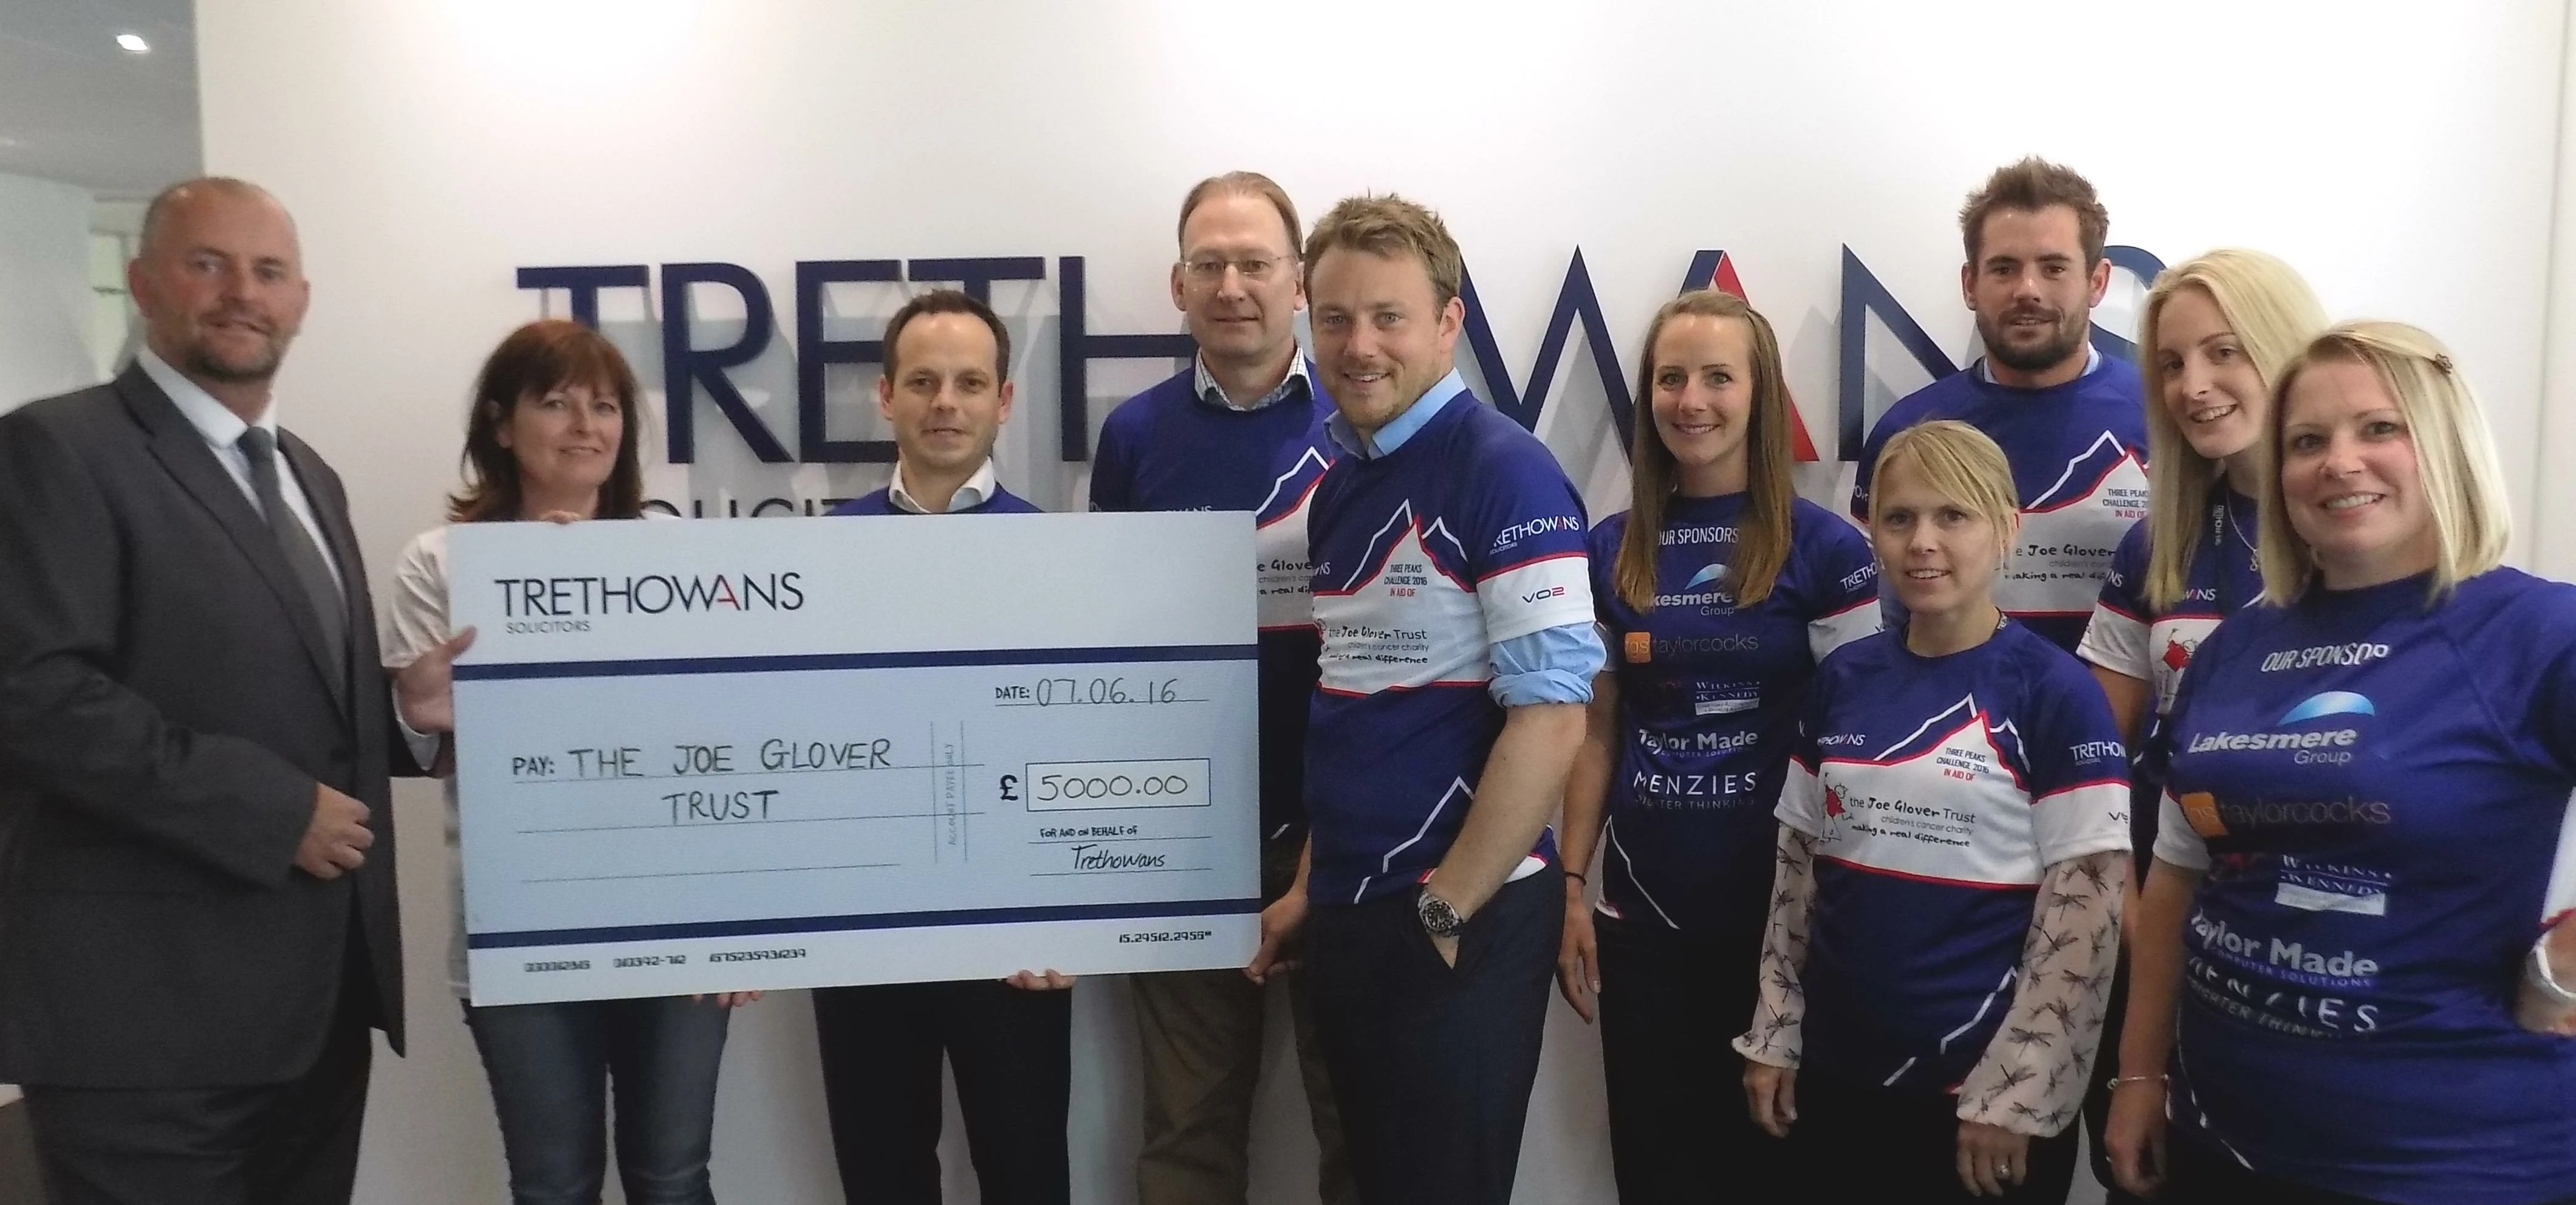 Staff from Trethowans present the money raised from the Three Peaks Challenge